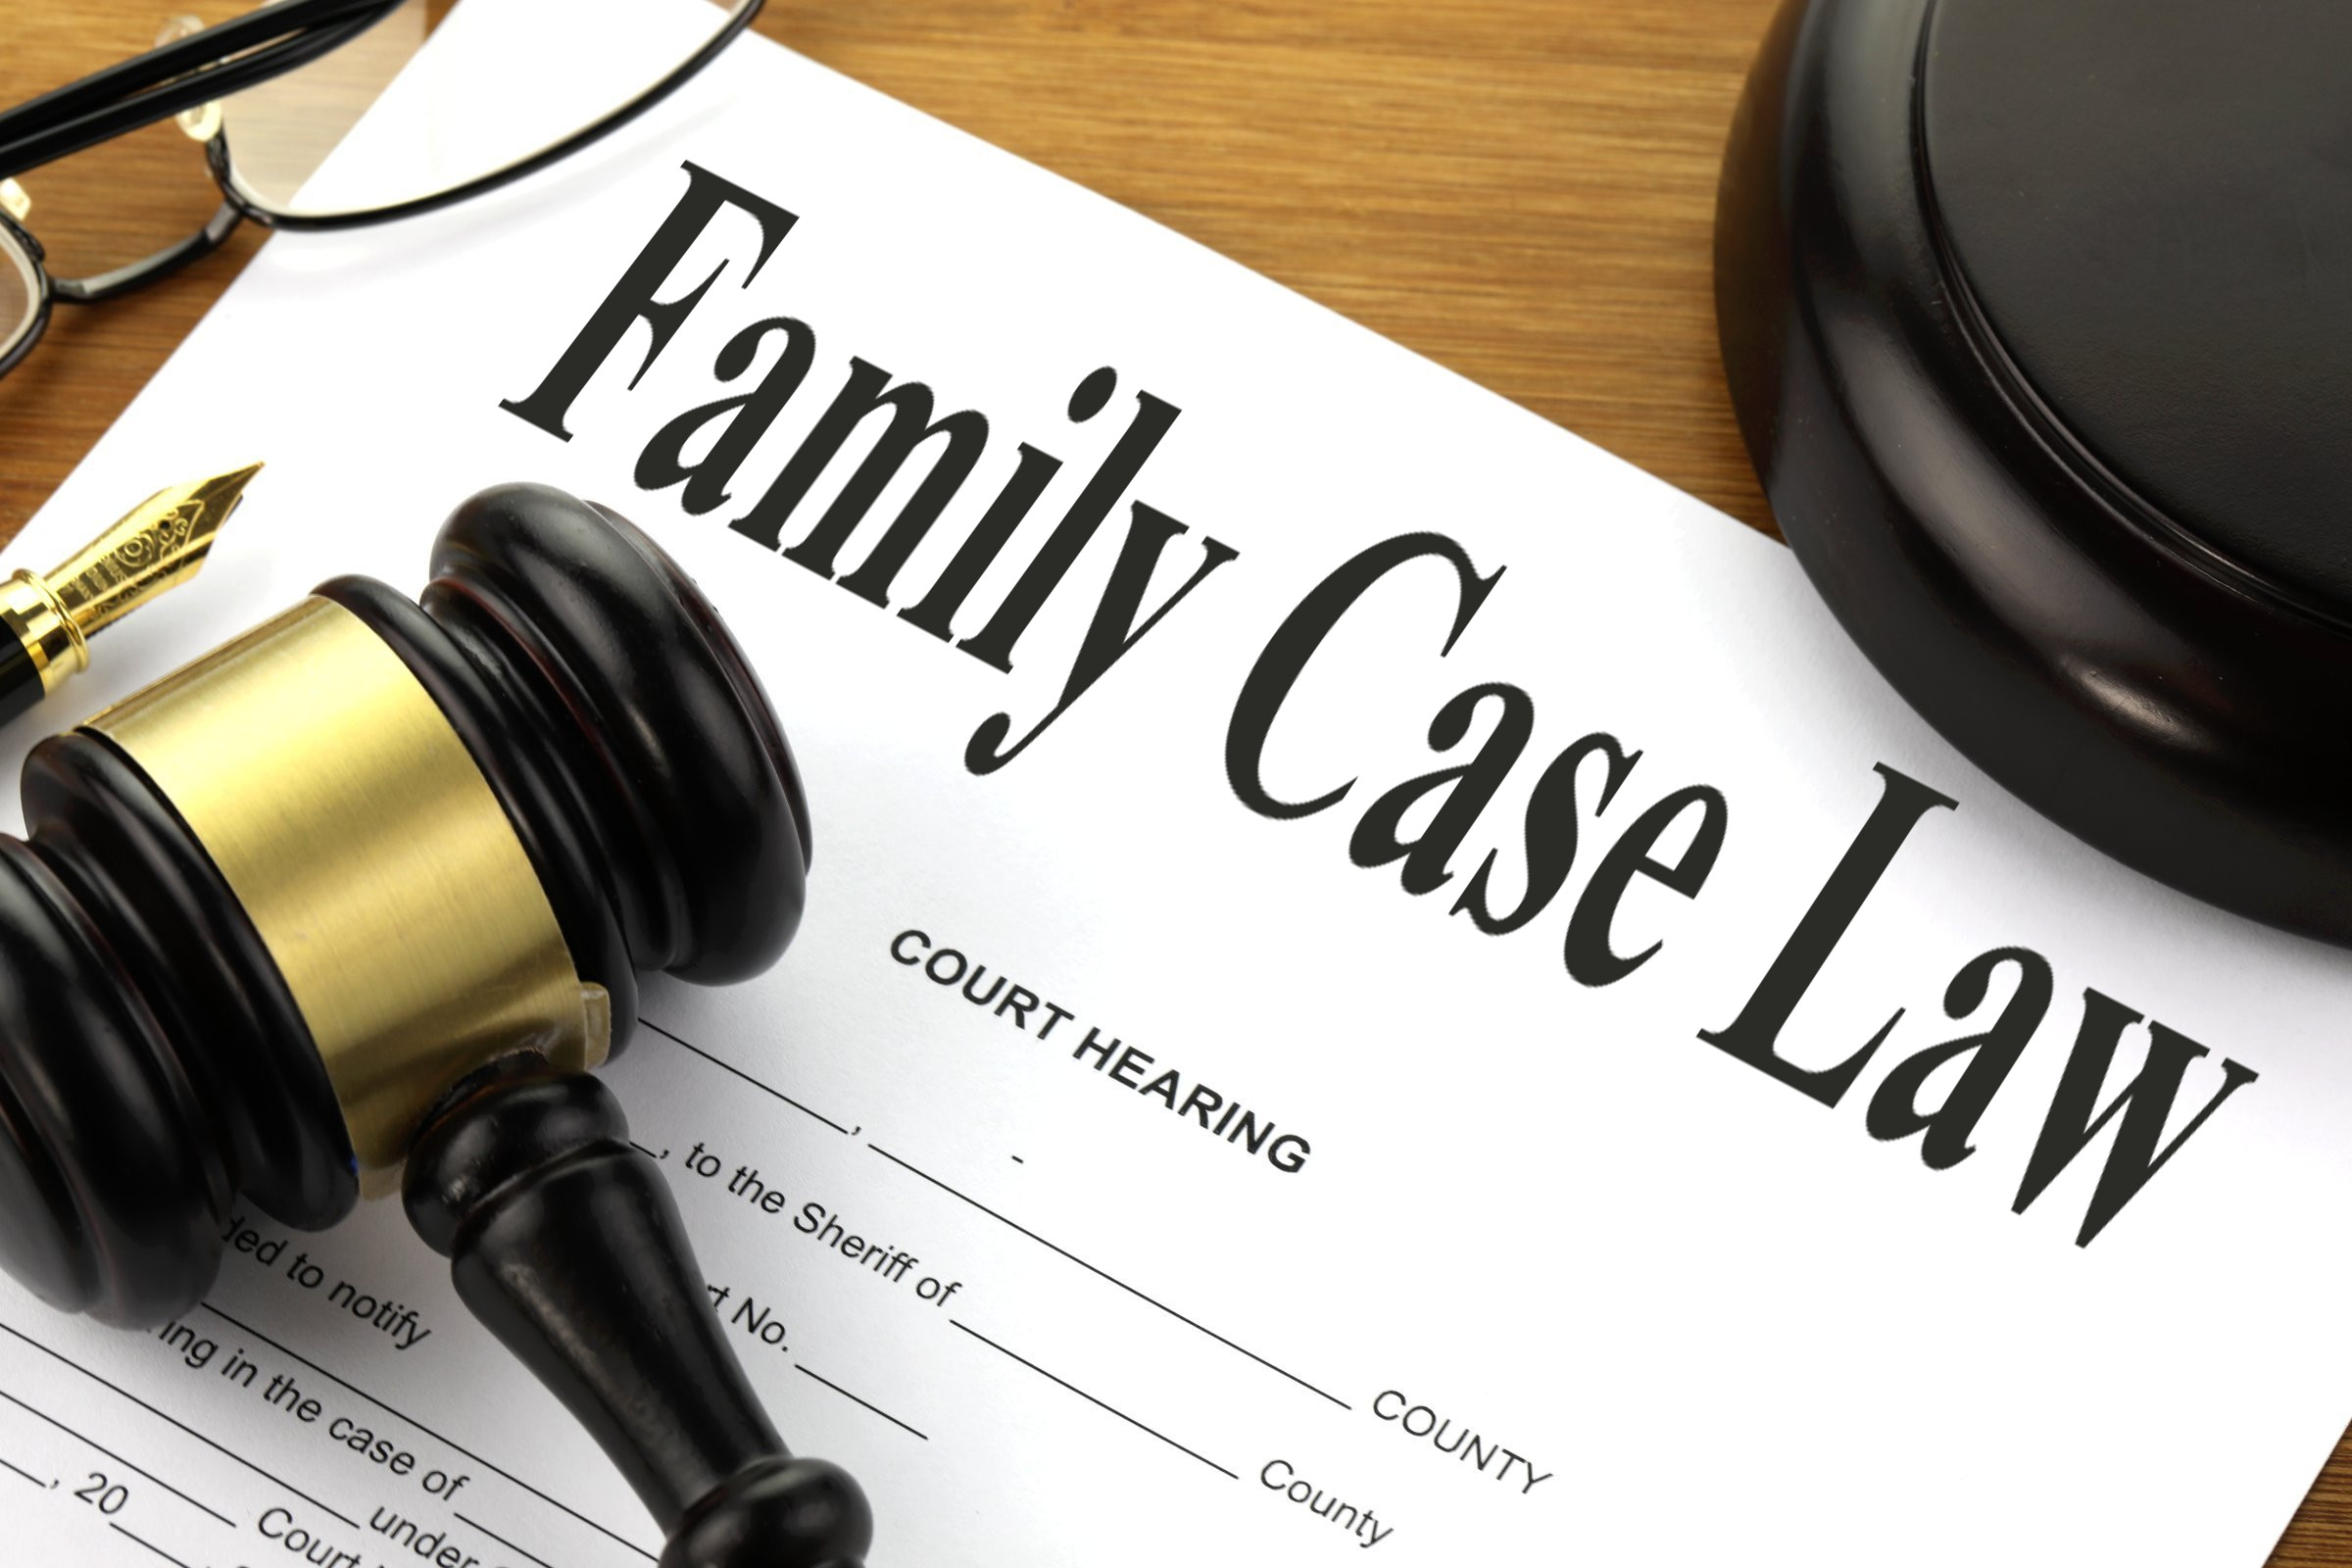 family case law